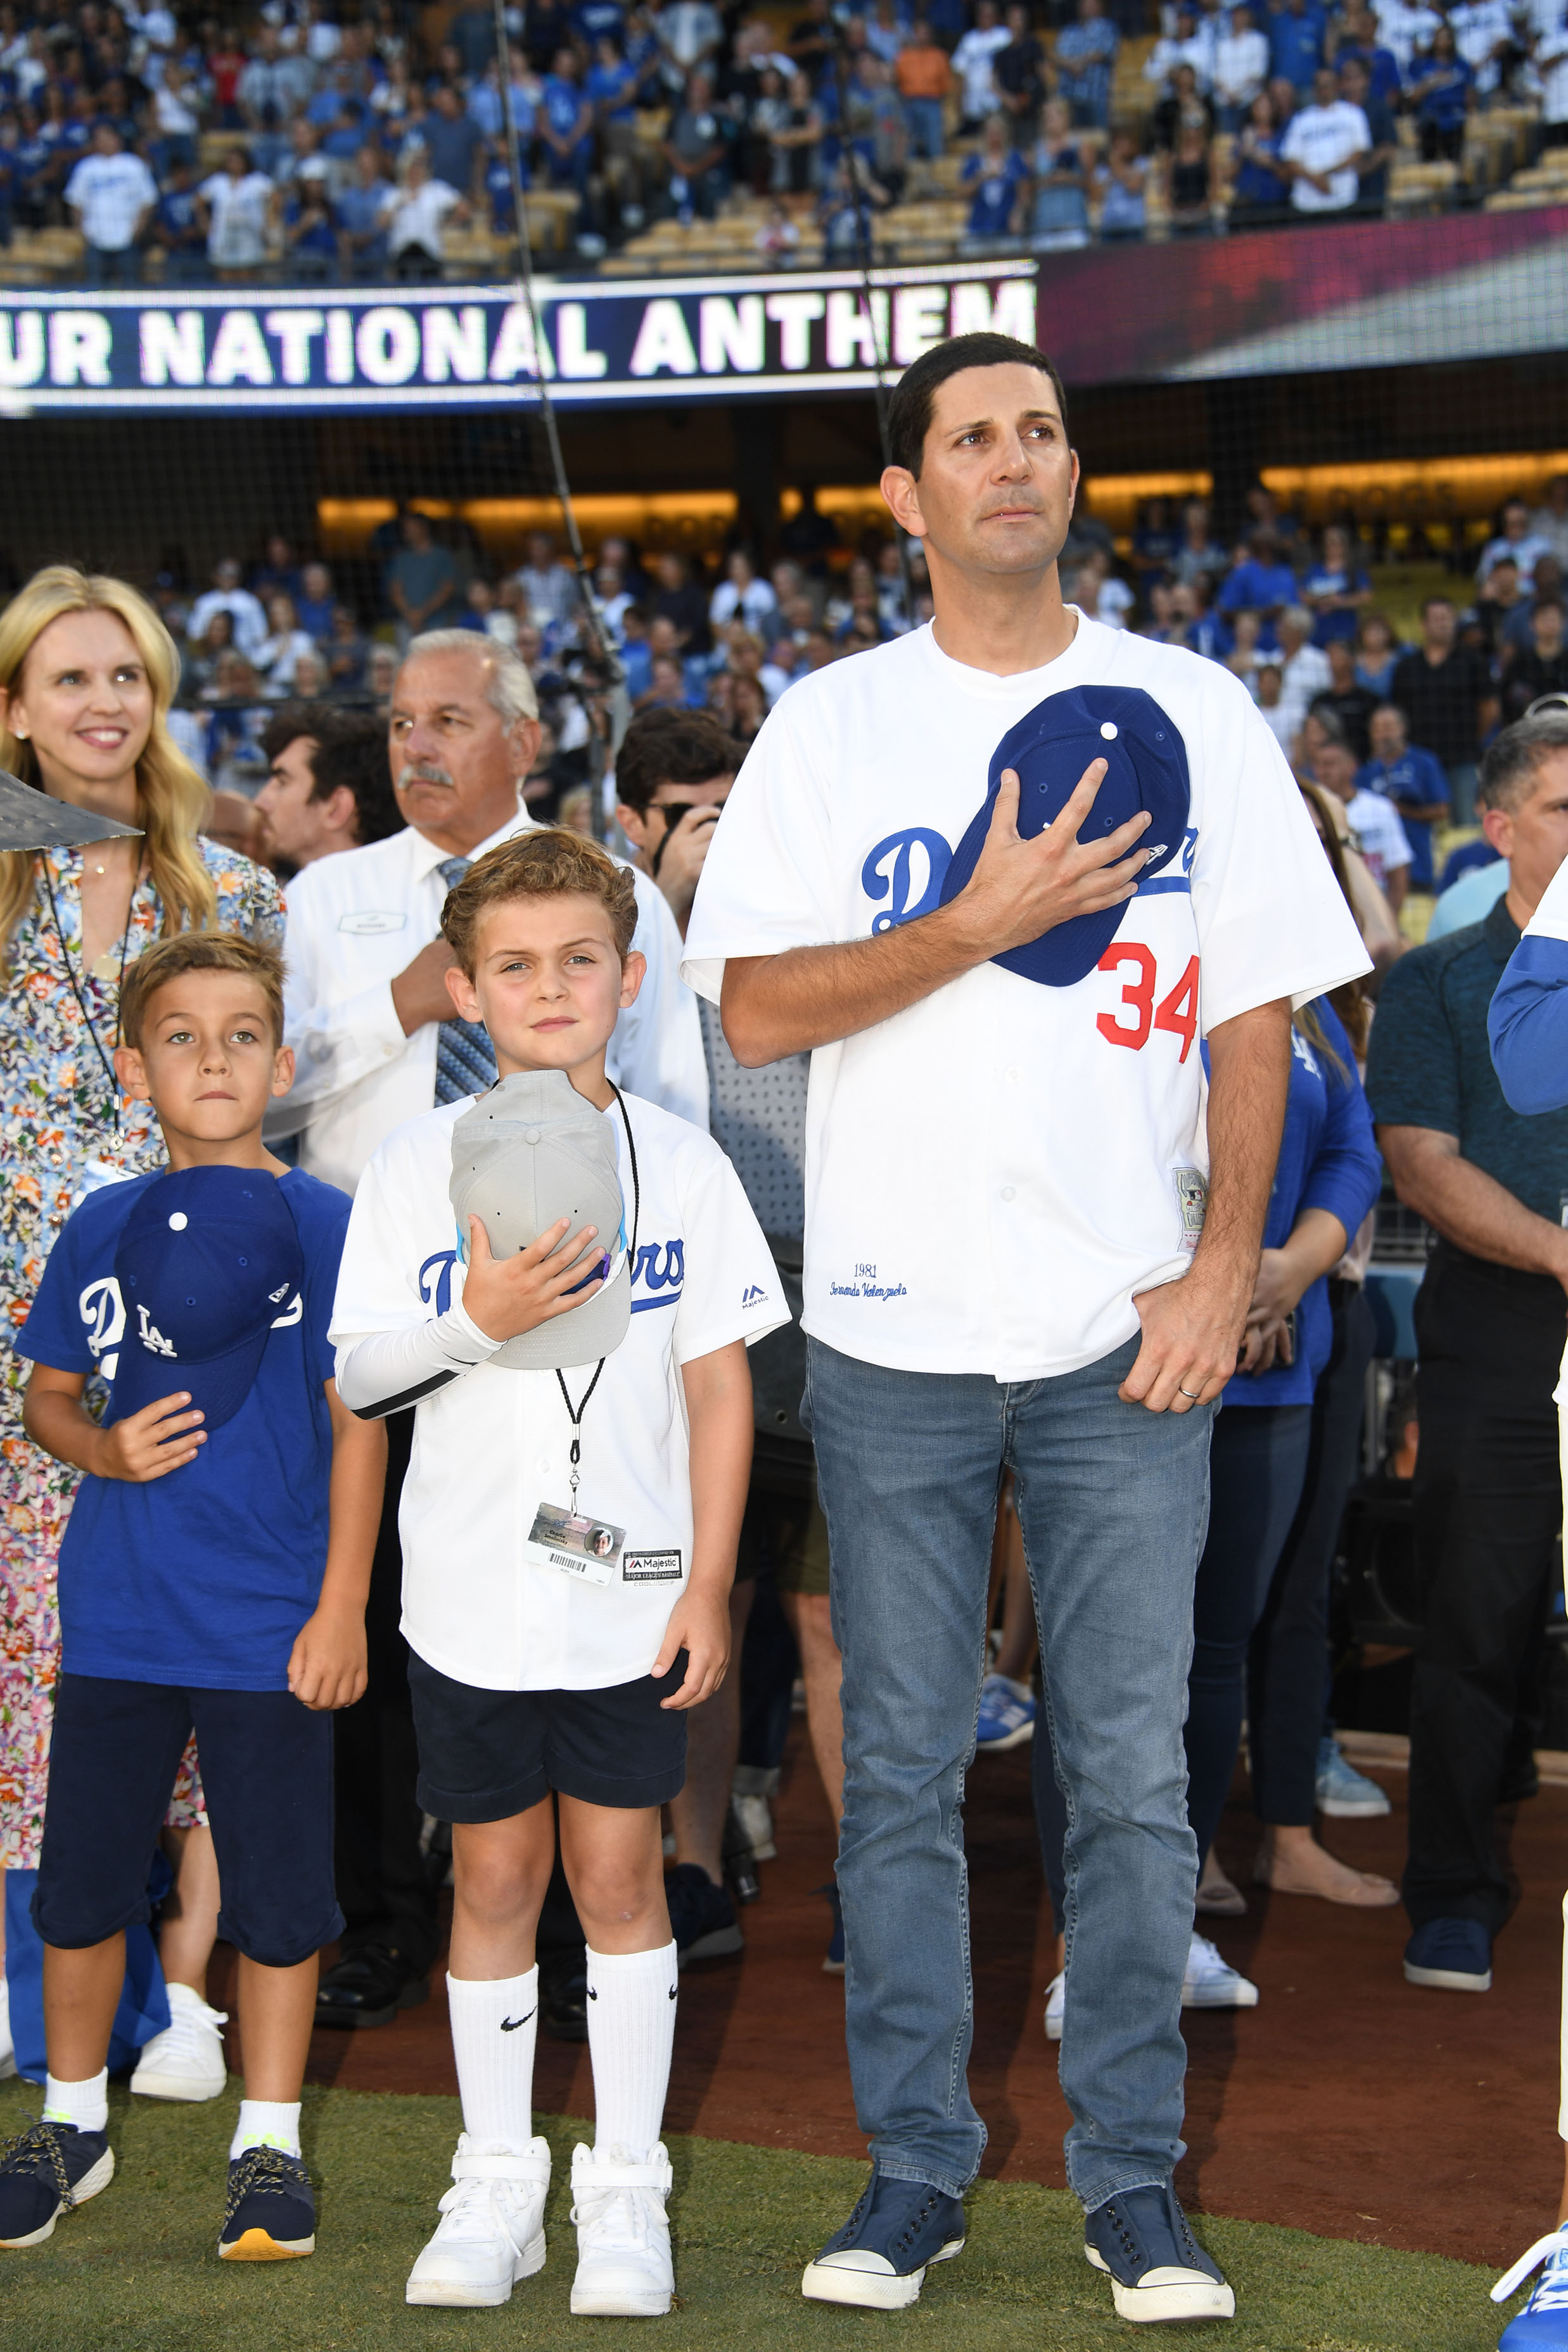 New Los Angeles Dodgers minority owner Alan Smolinisky, right, and his son Charlie Mario, in white jersey, stand for National Anthem at a Los Angeles Dodgers game at Dodger Stadium on September 21, 2019. (Jon SooHoo/LA Dodgers)